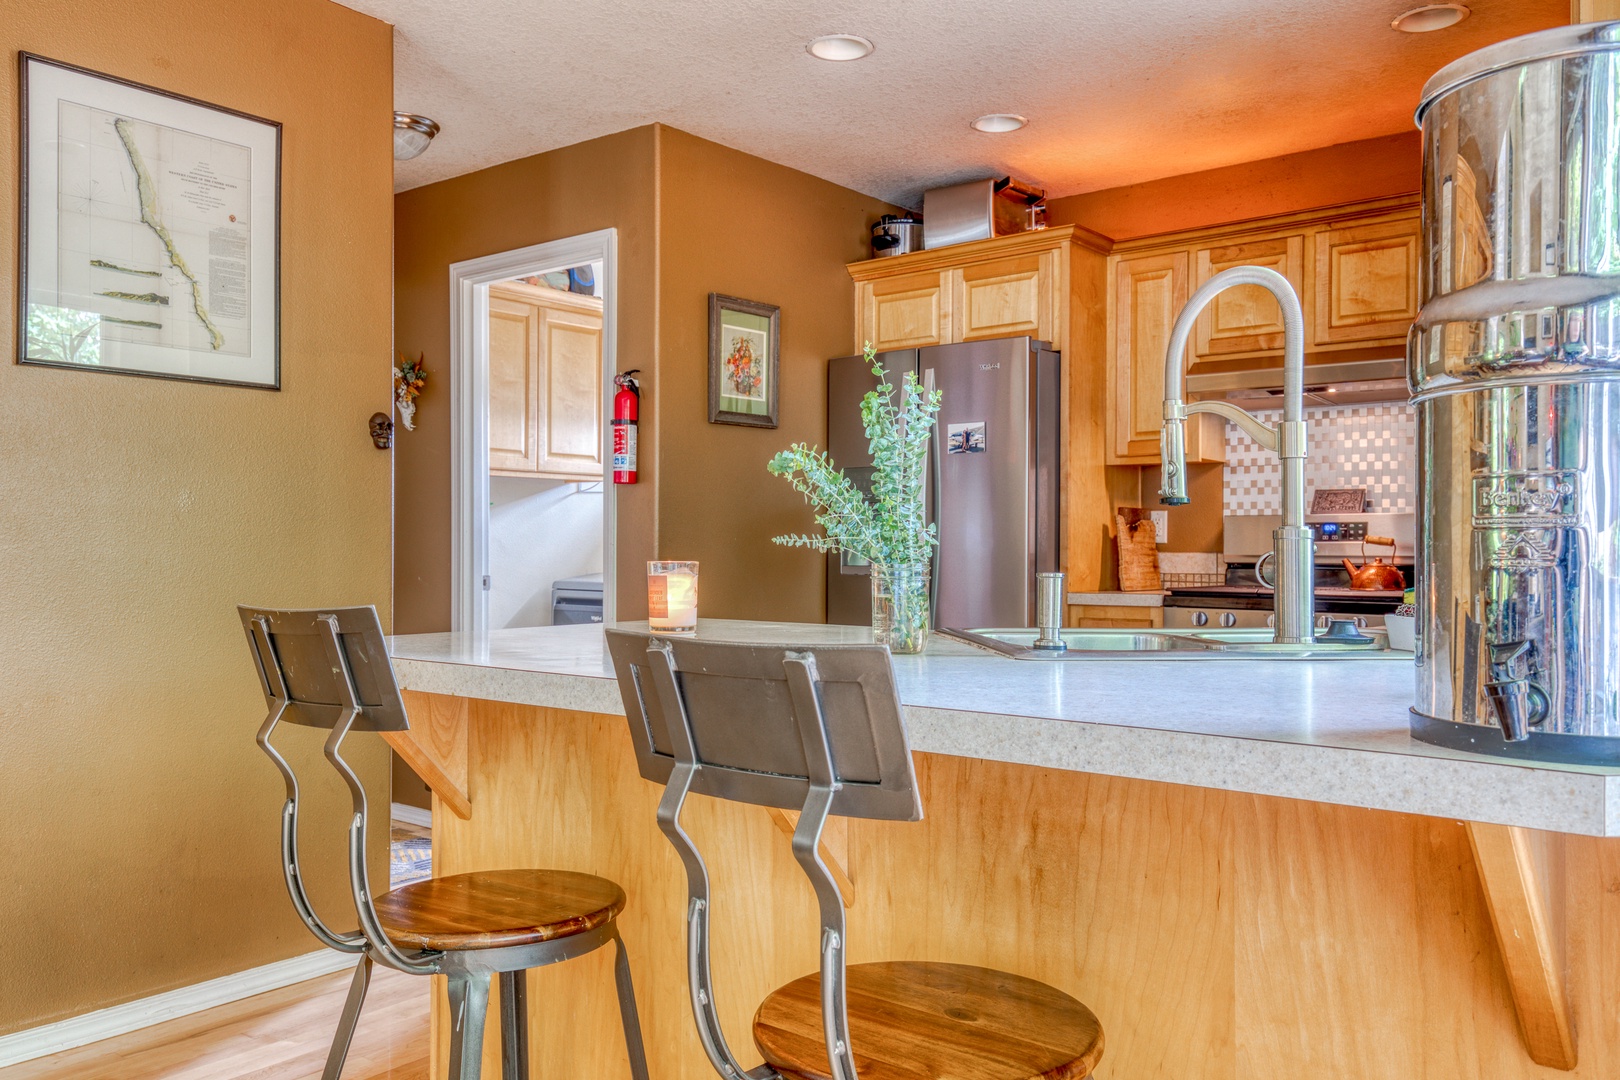 Clackamas Vacation Rentals, Duck Crossing - The breakfast bar has seating for 2